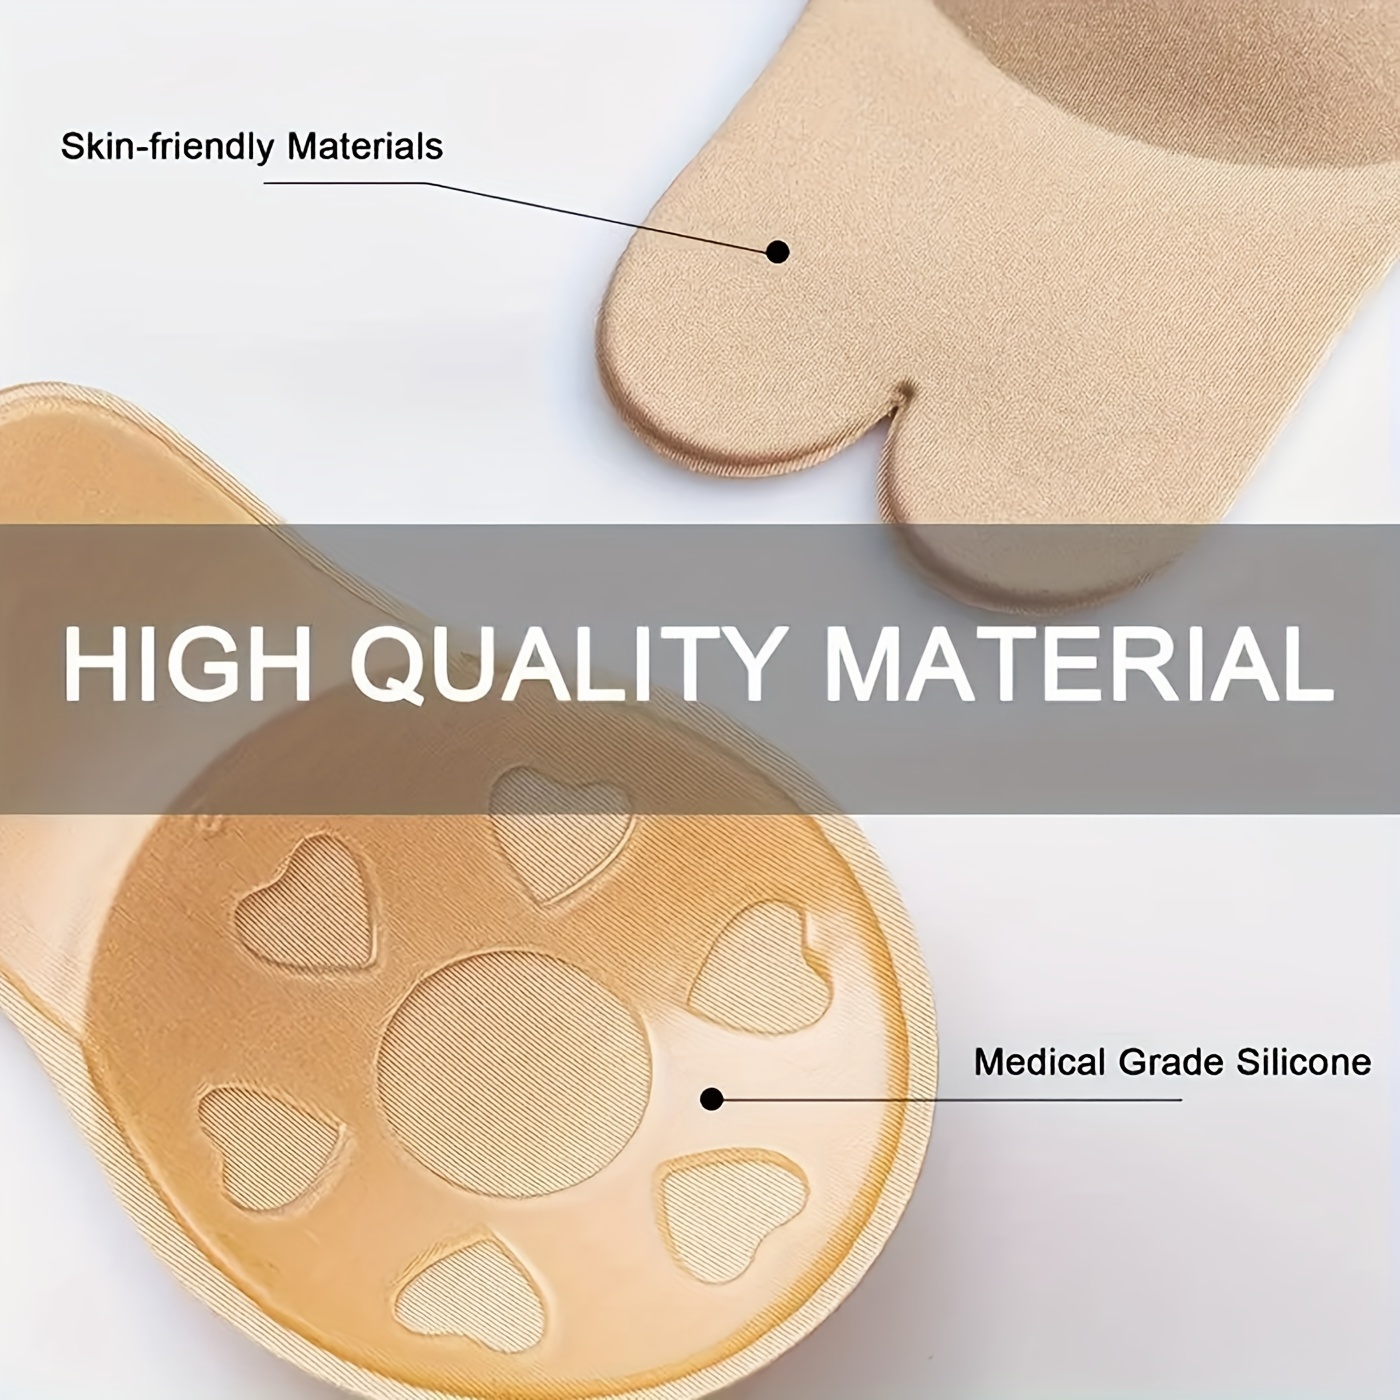 House of Beauty Nippy Covers (Silicone Medical Grade Bra) Silicone Peel and  Stick Bra Pads Price in India - Buy House of Beauty Nippy Covers (Silicone  Medical Grade Bra) Silicone Peel and